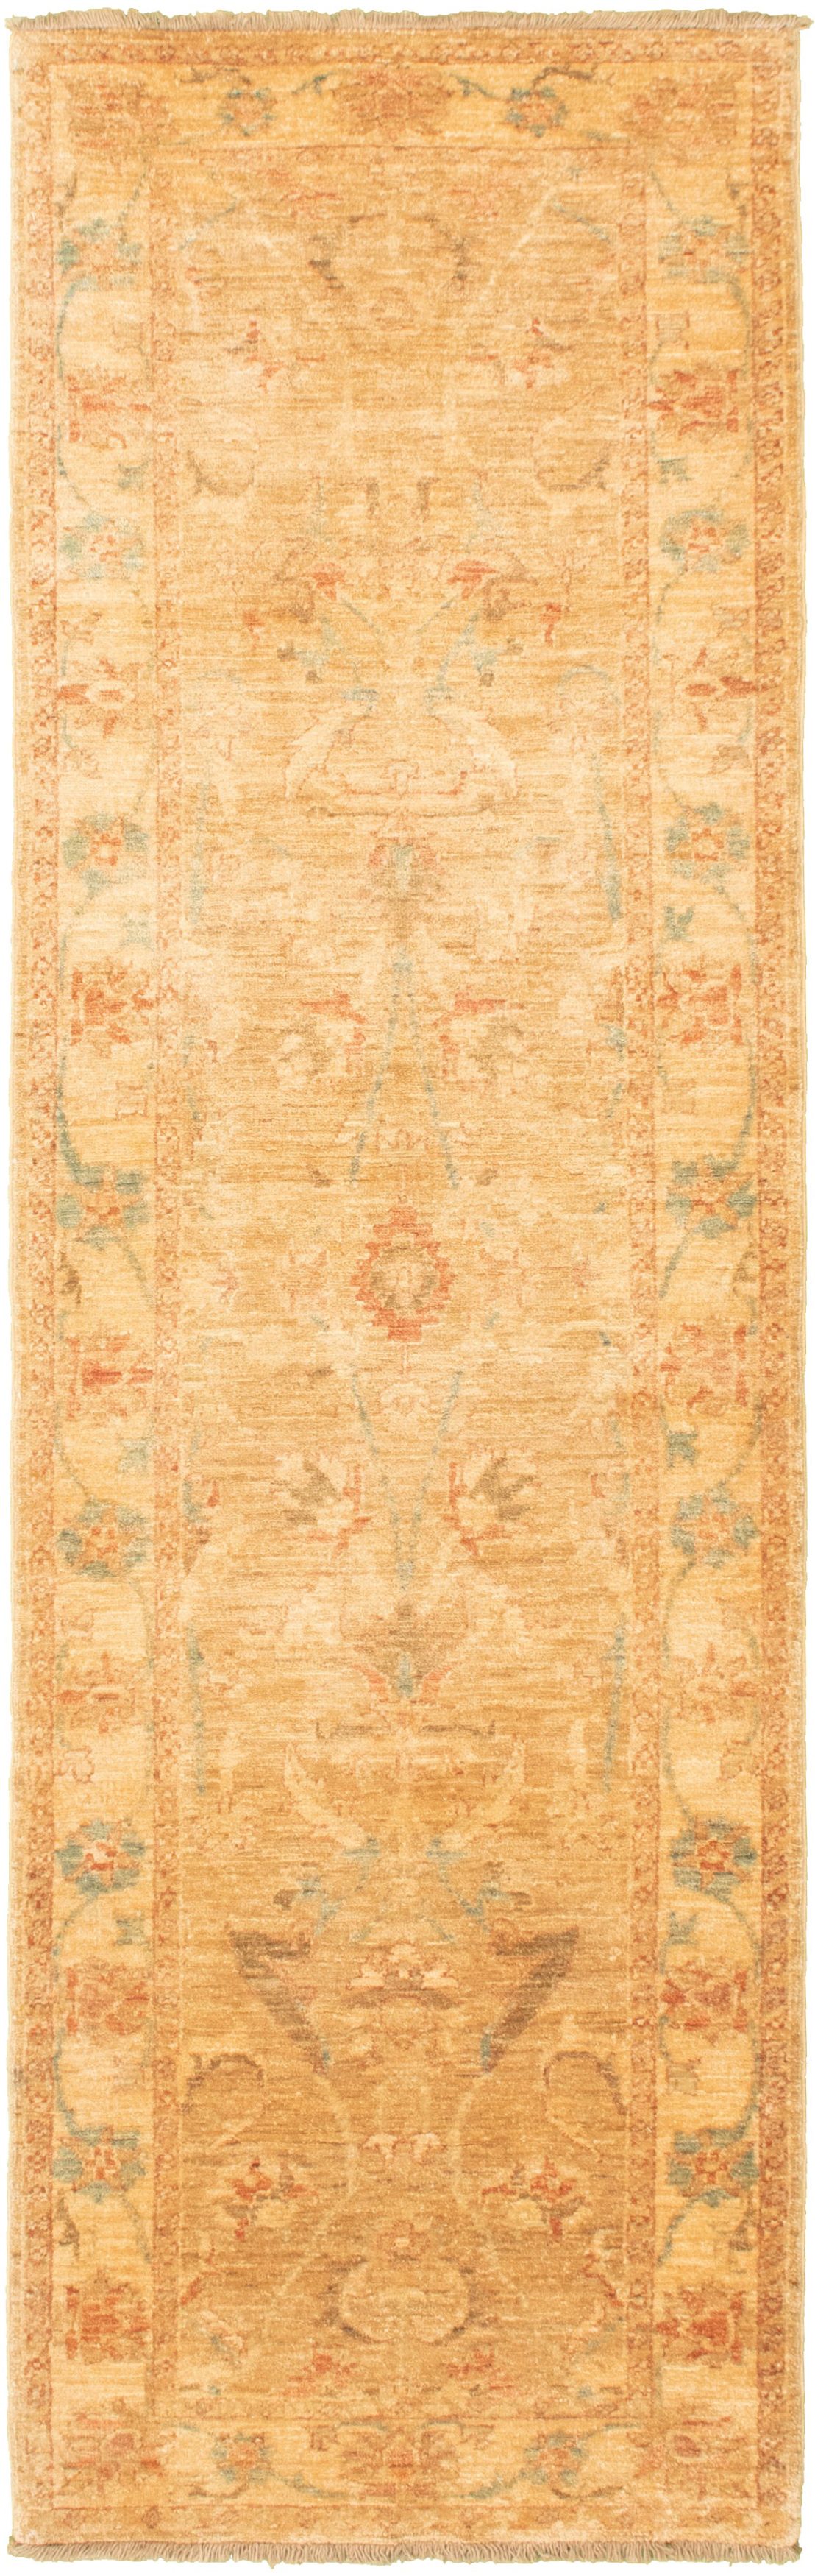 Hand-knotted Chobi Finest Light Brown Wool Rug 2'6" x 10'0" Size: 2'6" x 10'0"  